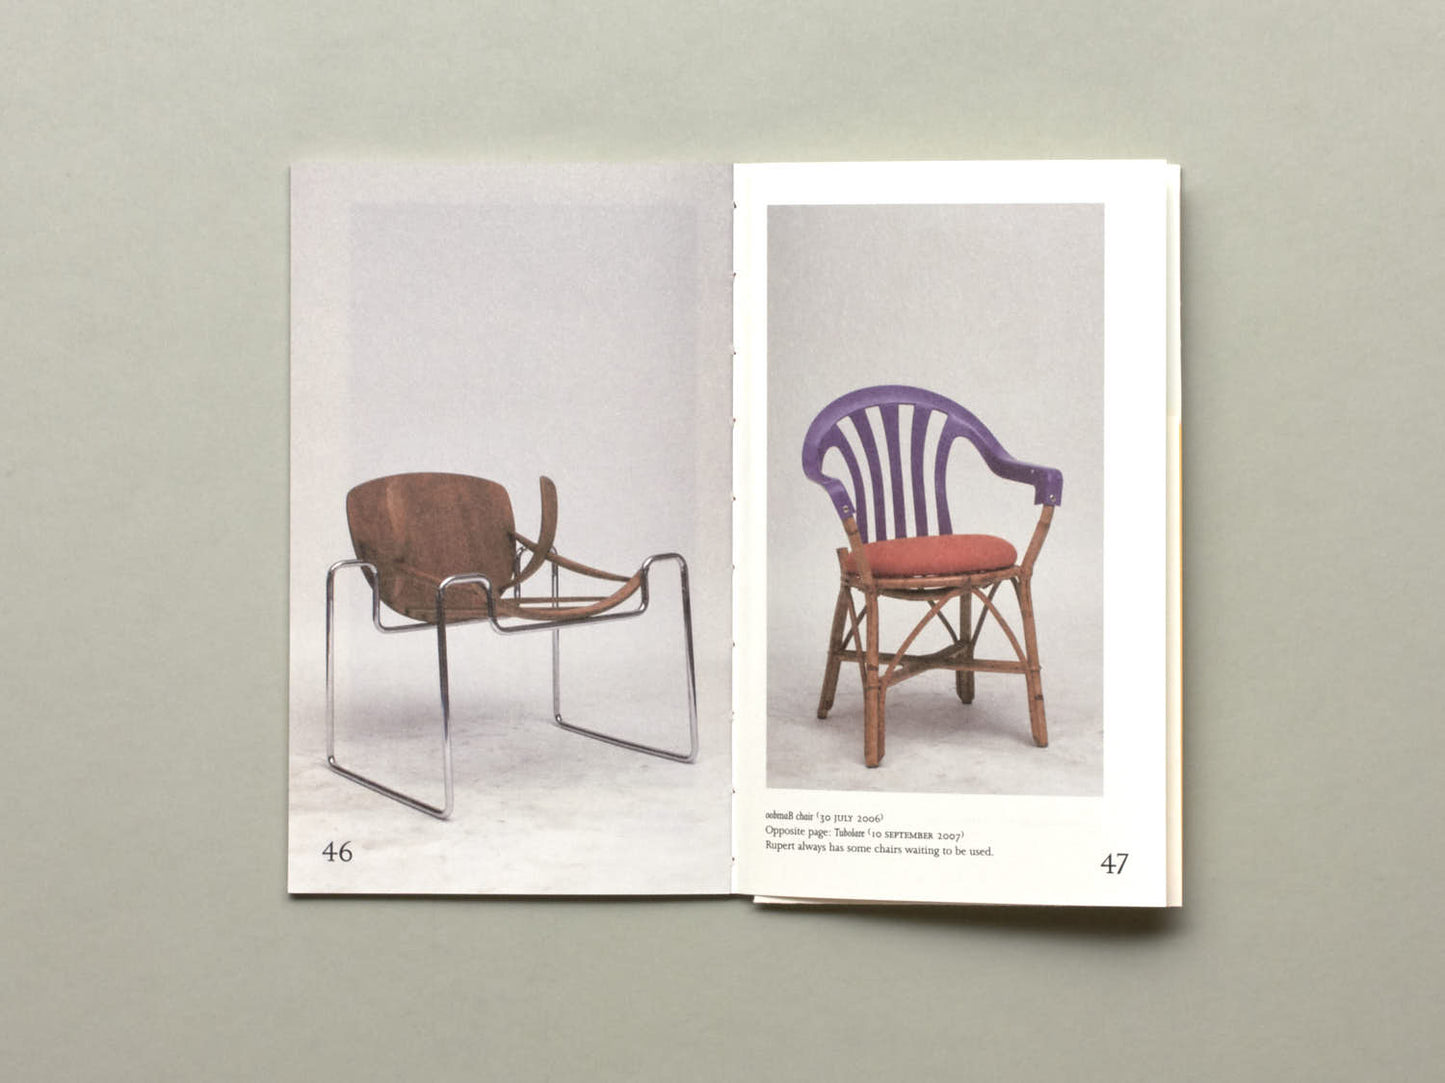 Martino Gamper, 100 Chairs in 100 Days and its 100 Ways (5th edition, 5th size)